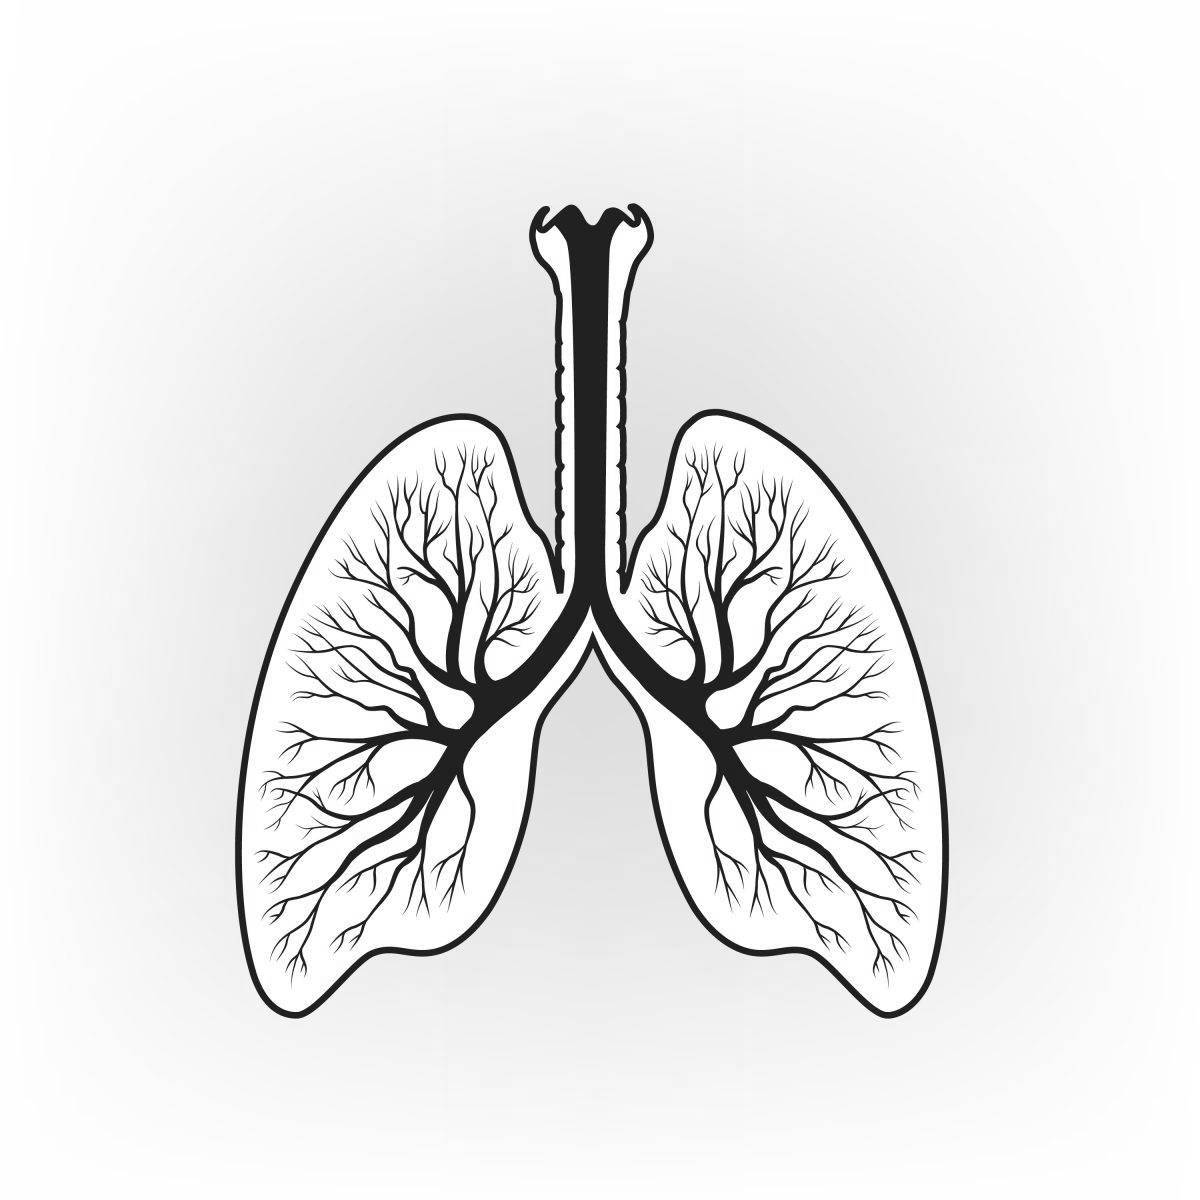 Human lungs for children #3